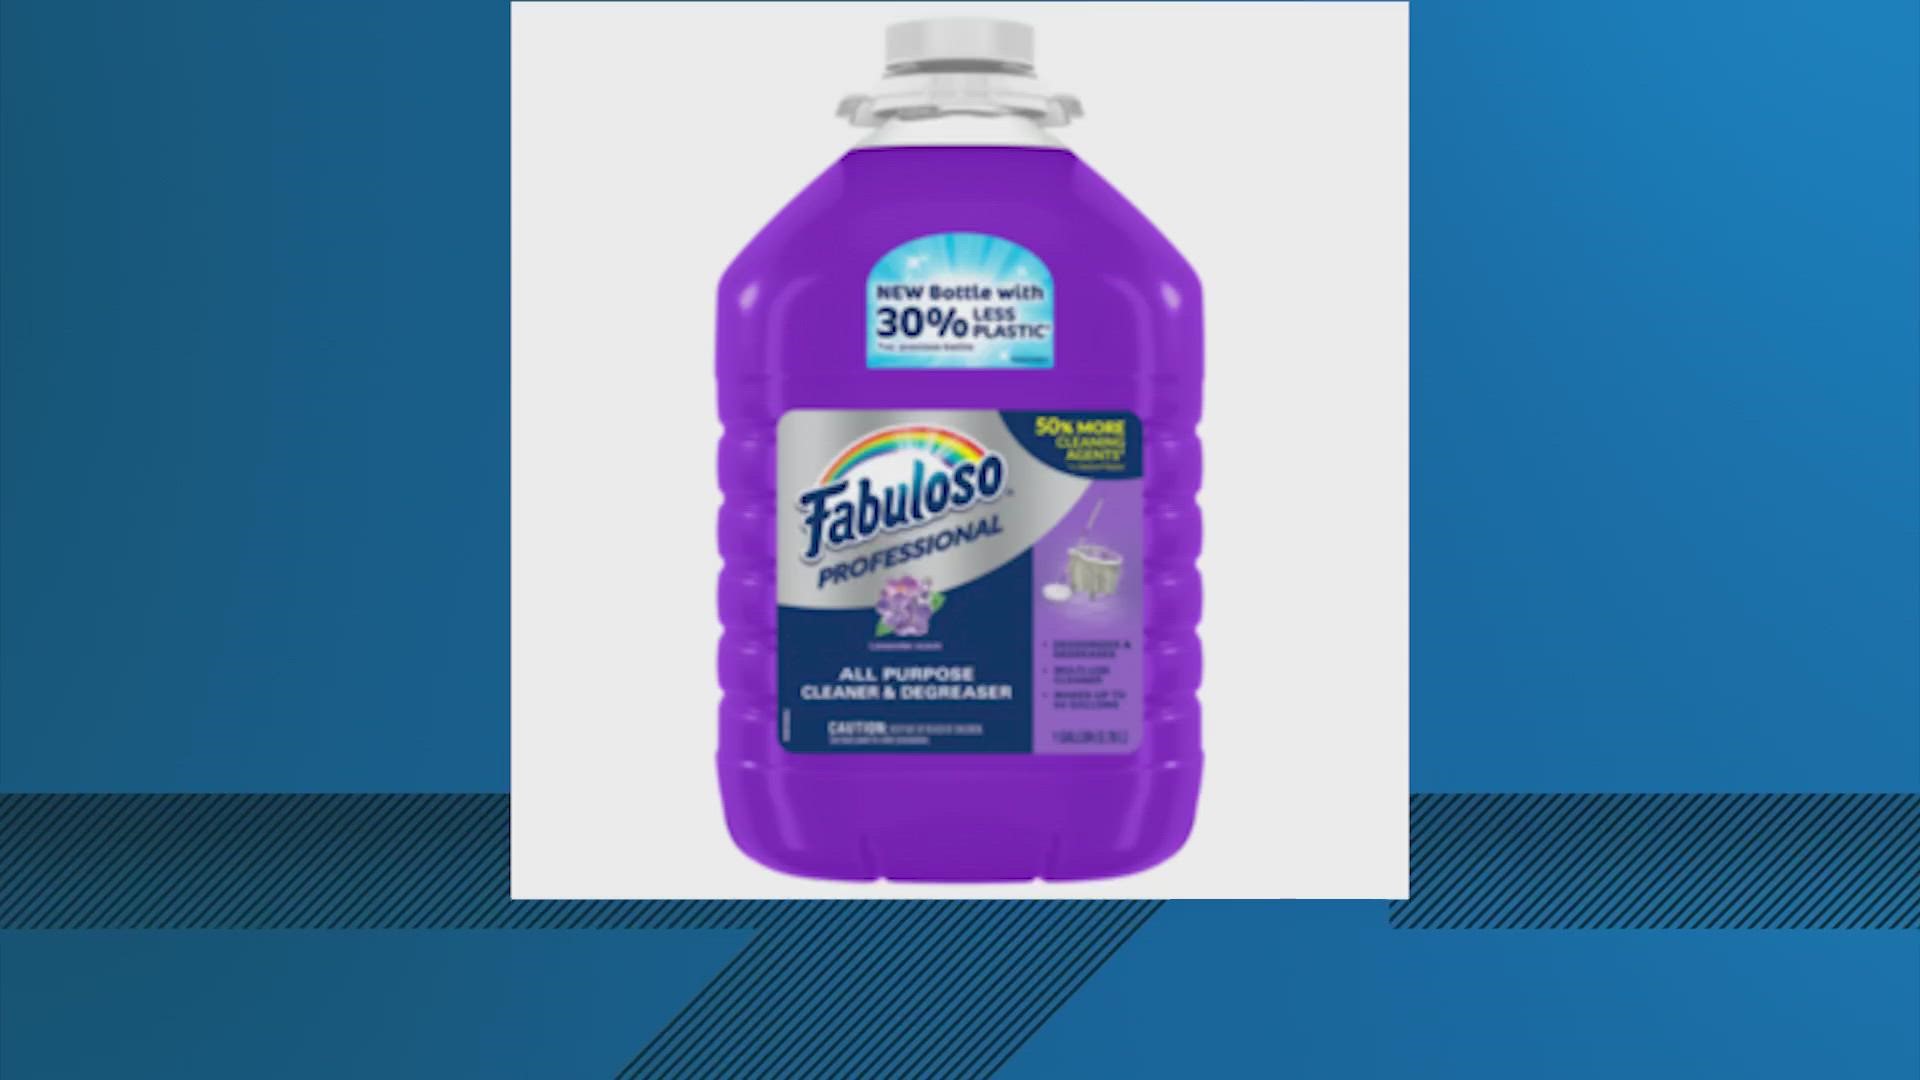 Fabuloso® said on its website that it is voluntarily recalling some of its multi-purpose cleaners because a preservative was not added at the intended levels during